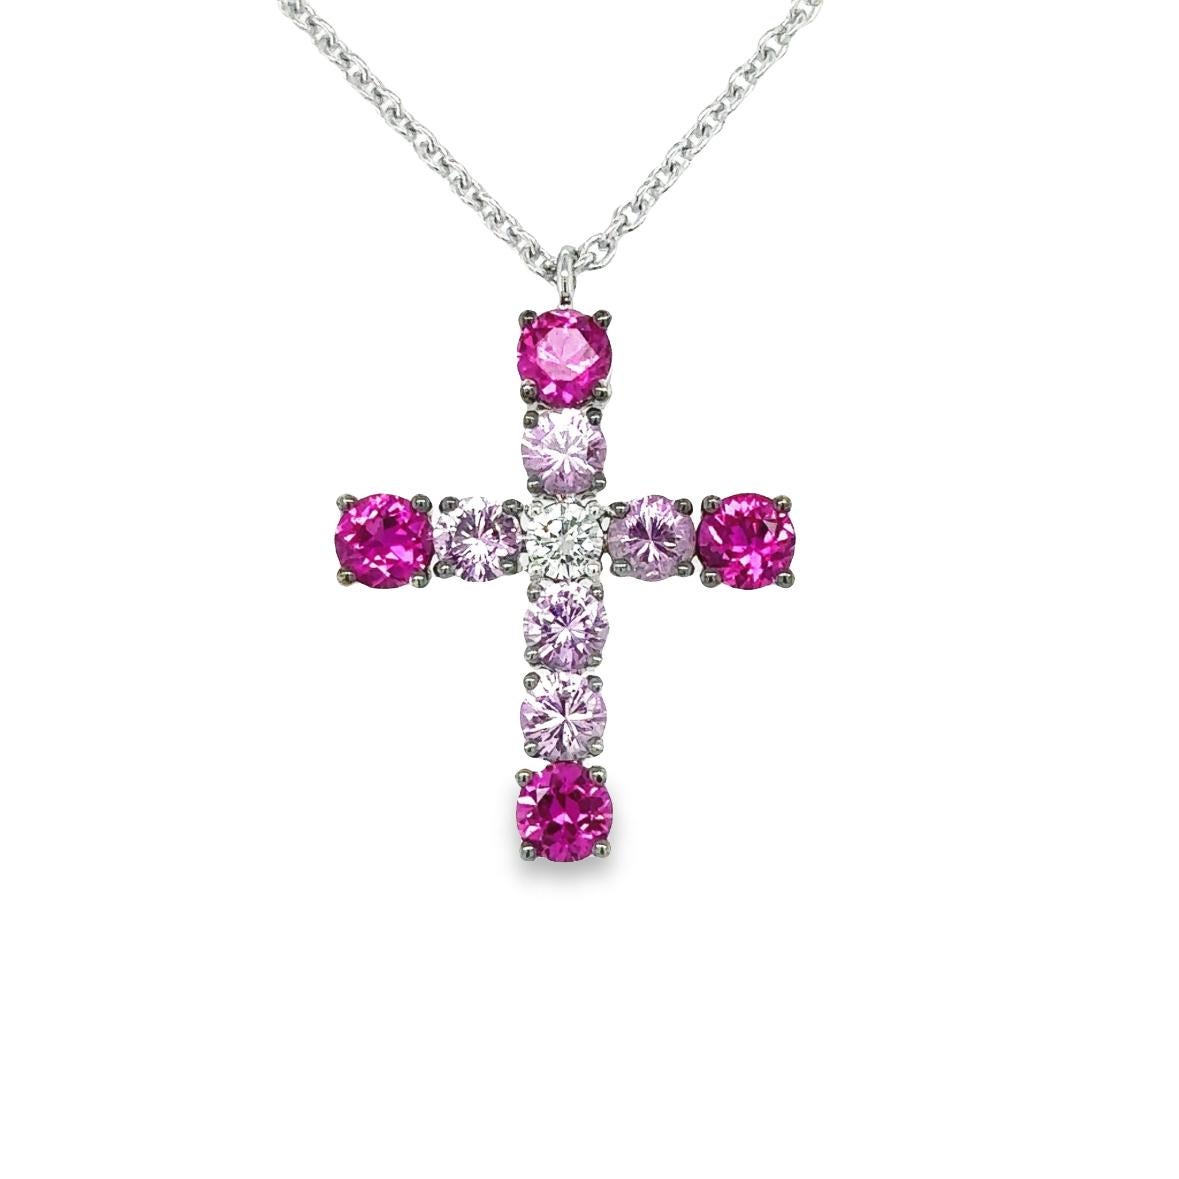 Presenting the TIMELESS Cross Necklace, skillfully crafted in 18Kt white gold with a weight of 5.60 grams. This exquisite piece features 4 Round Rubies, totaling 0.95 carats, alongside 5 Round Pink Sapphires, totaling 0.96 carats, and a Round